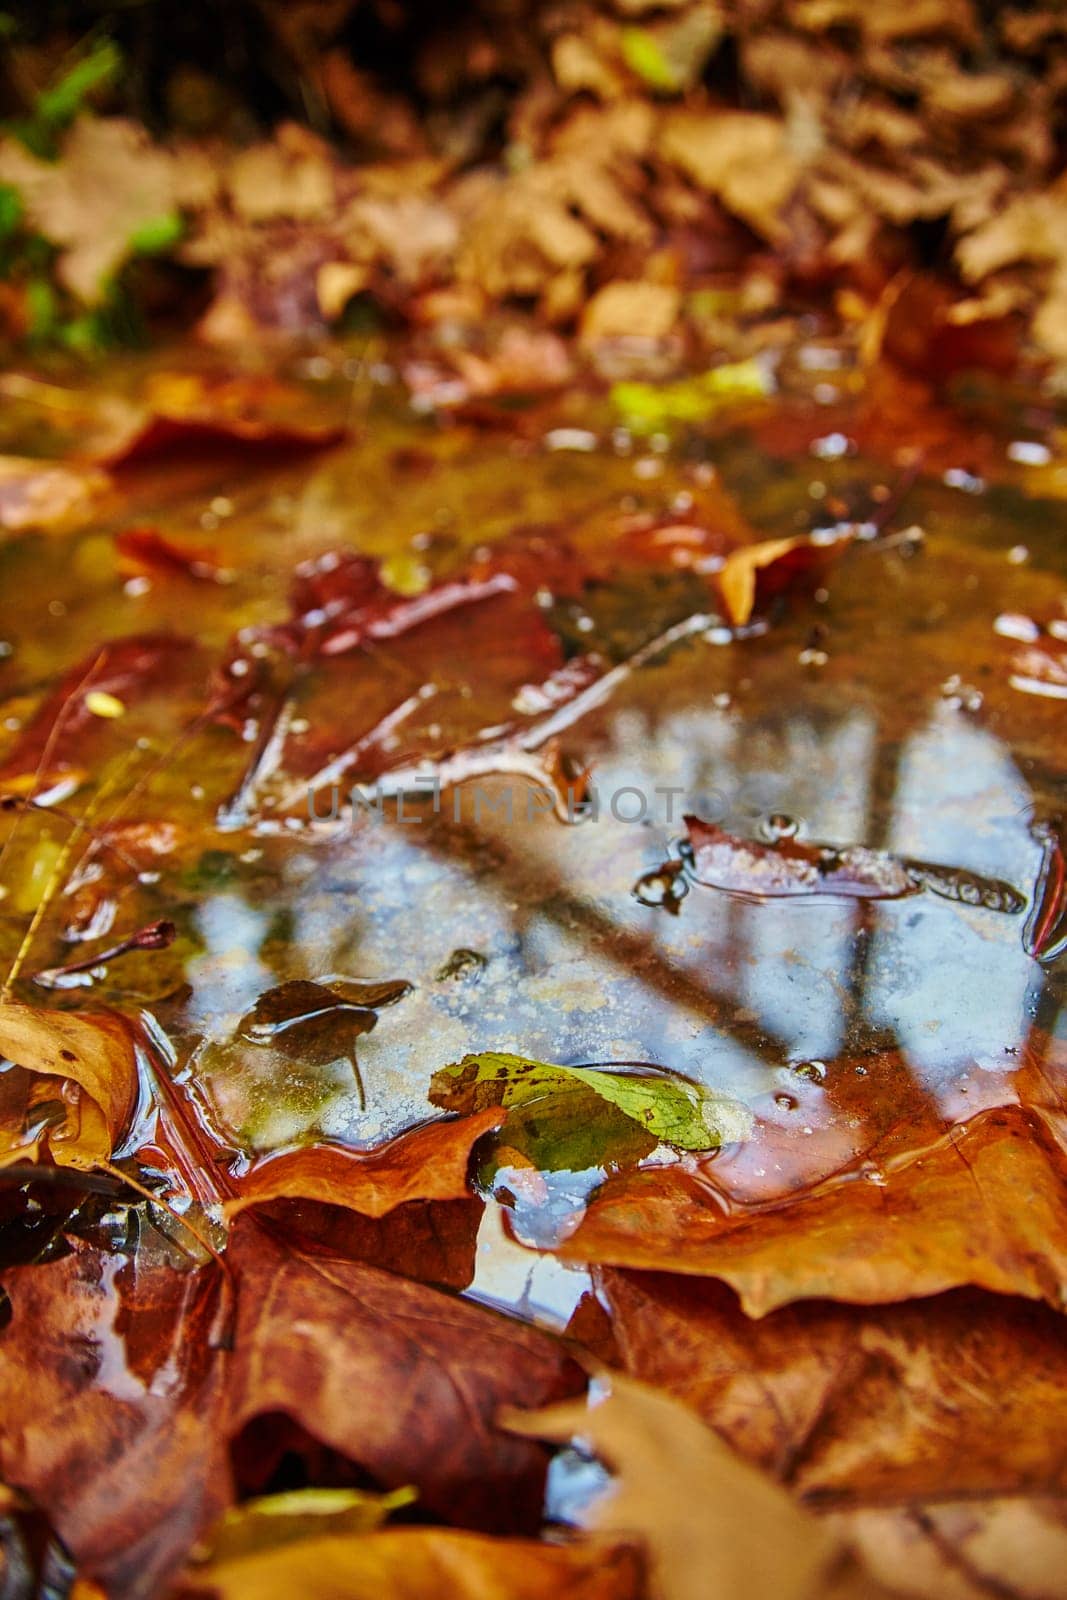 Immerse yourself in the tranquility of autumn with this captivating photo of fallen leaves creating a colorful mosaic in a reflective pool at Bicentennial Acres, Fort Wayne, Indiana. The vibrant hues and gentle ripples evoke a sense of peace.